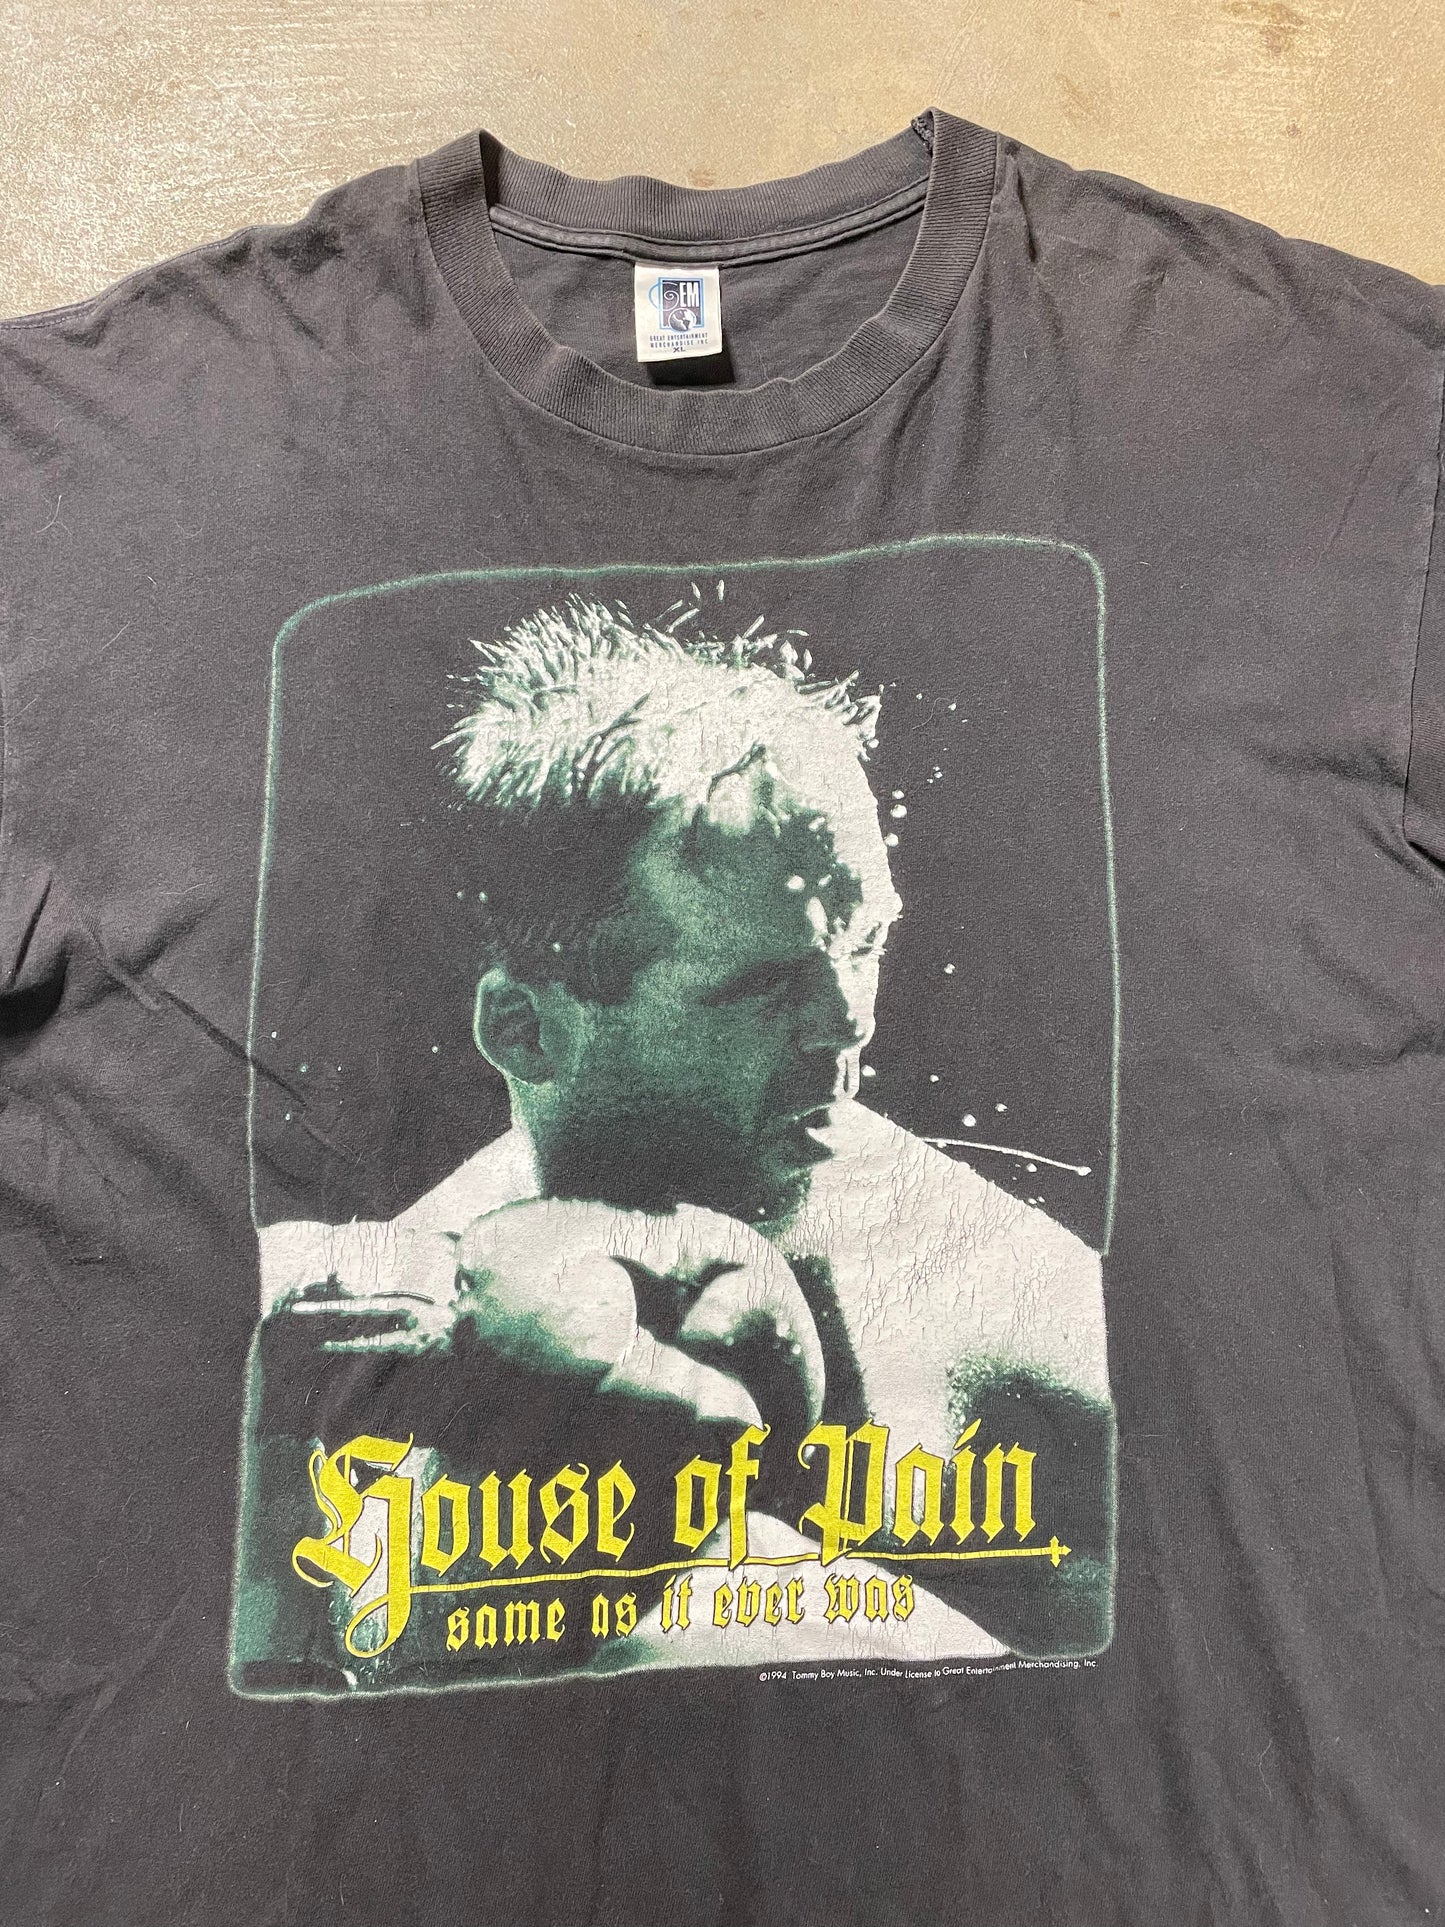 1994 House of Pain ‘Same as it Ever Was’ Tee